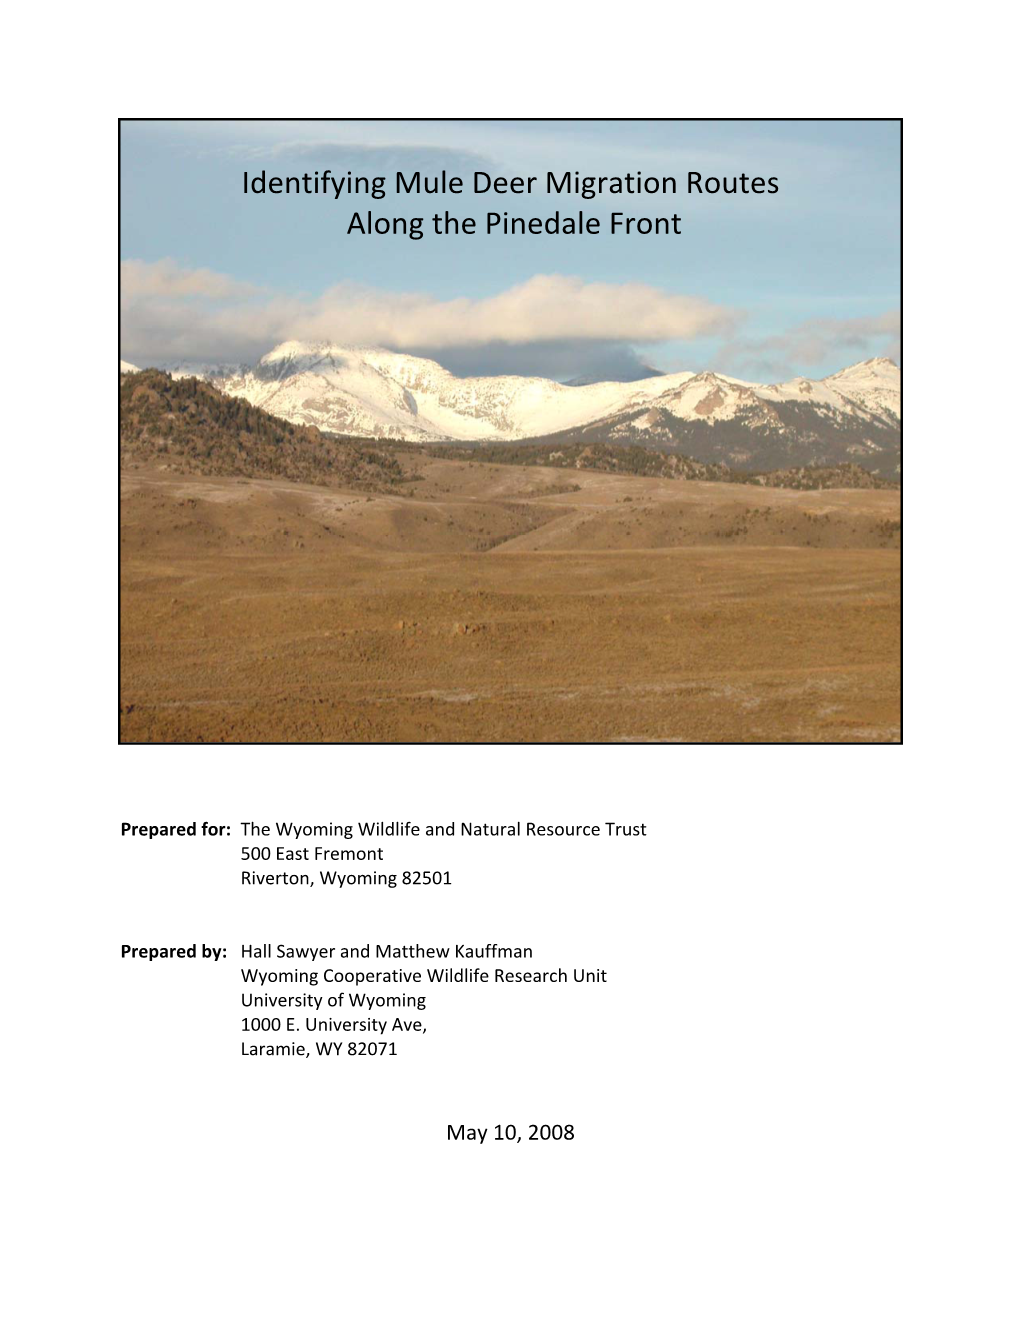 Identifying Mule Deer Migration Routes Along the Pinedale Front